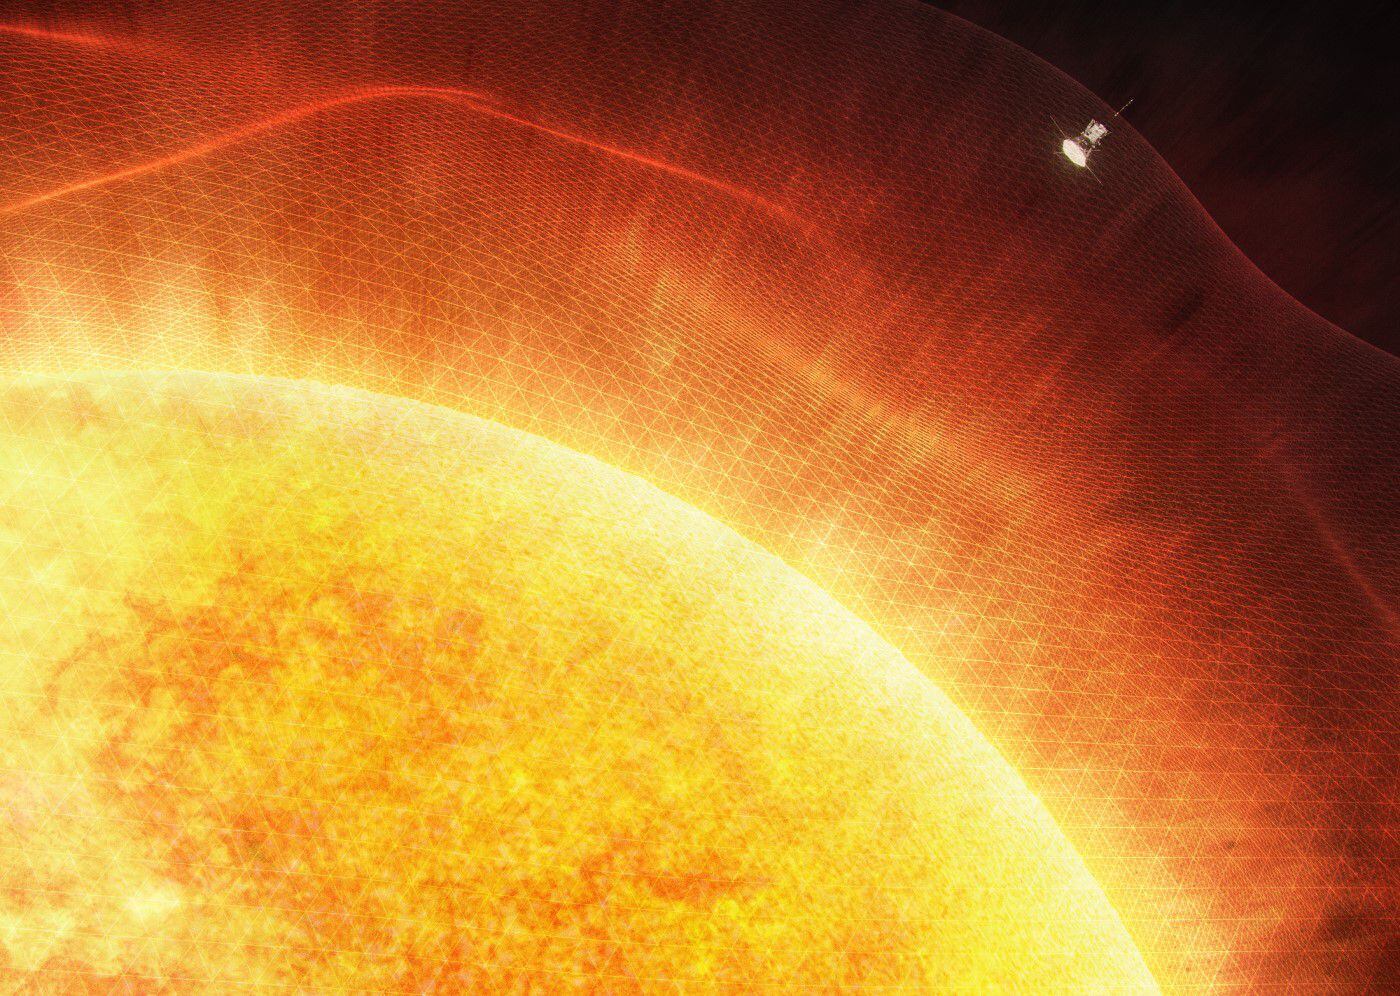 NASA: How did the Parker space probe survive the violent solar flare it went through?